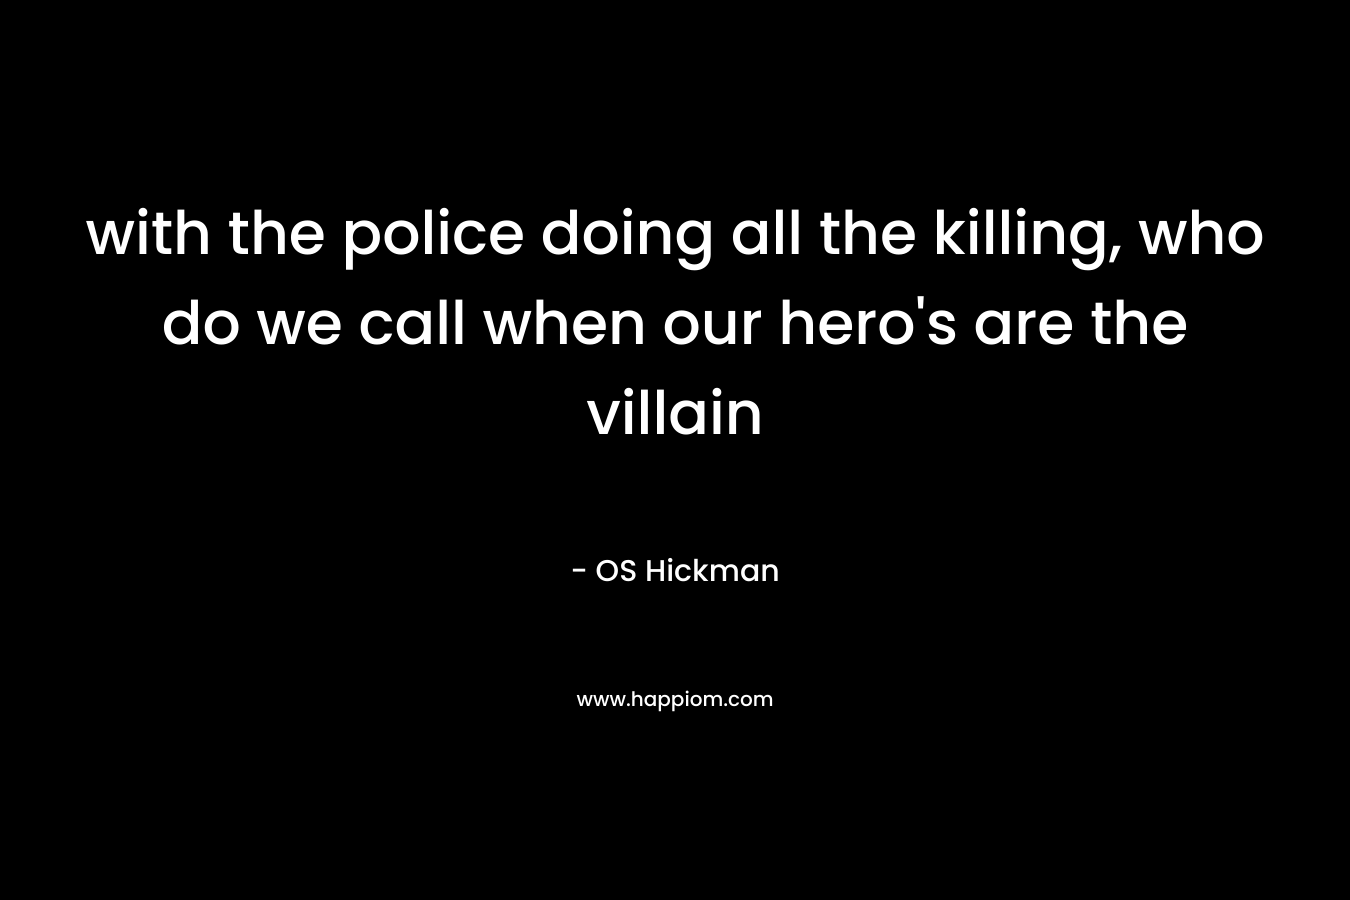 with the police doing all the killing, who do we call when our hero's are the villain